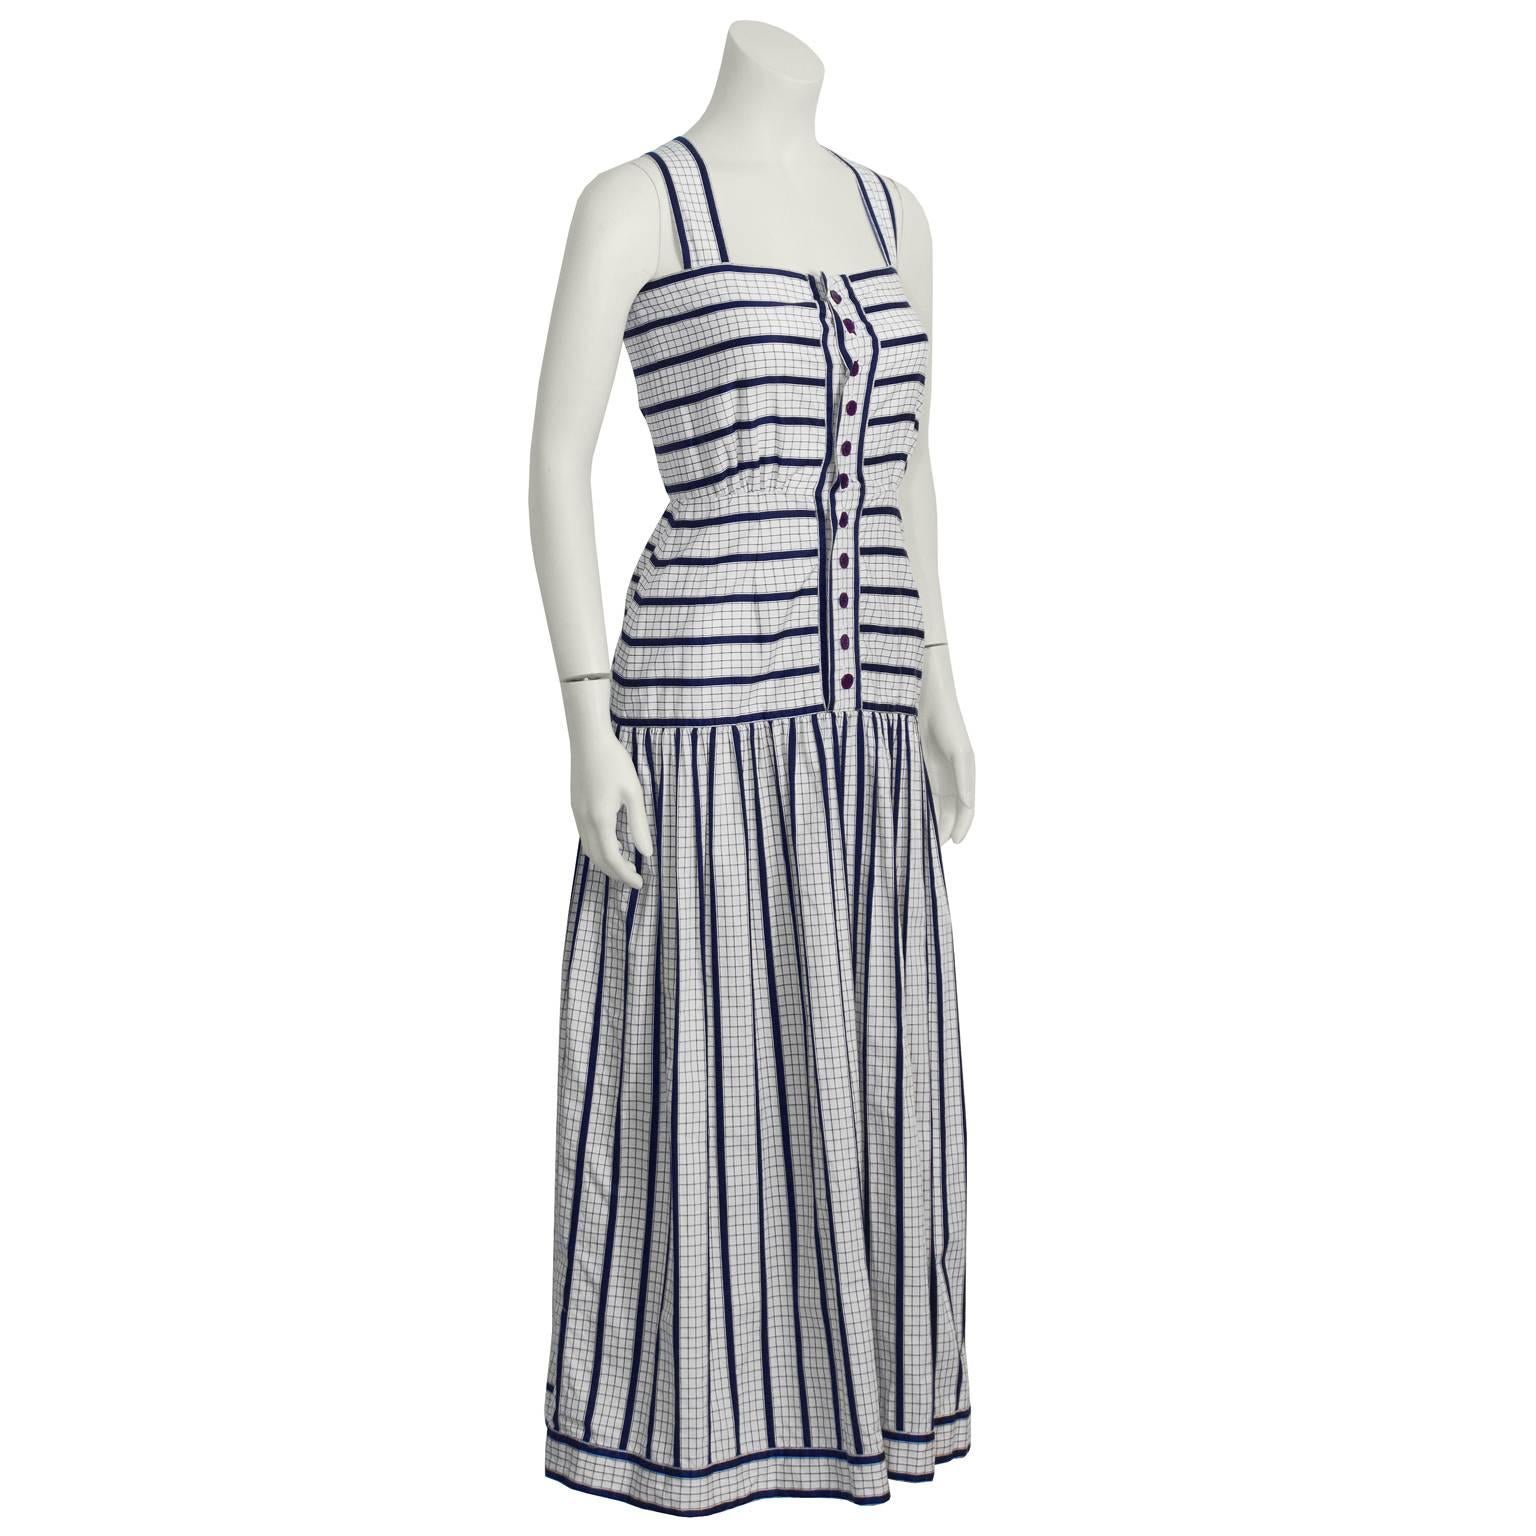 This 1970's Adele Simpson cotton maxi sundress is checkered white with navy stripes. Features a fitted waist, front button closure, and gathering at the hip set skirt. Excellent vintage condition. A wonderfully feminine and sweet summer item!  Fits